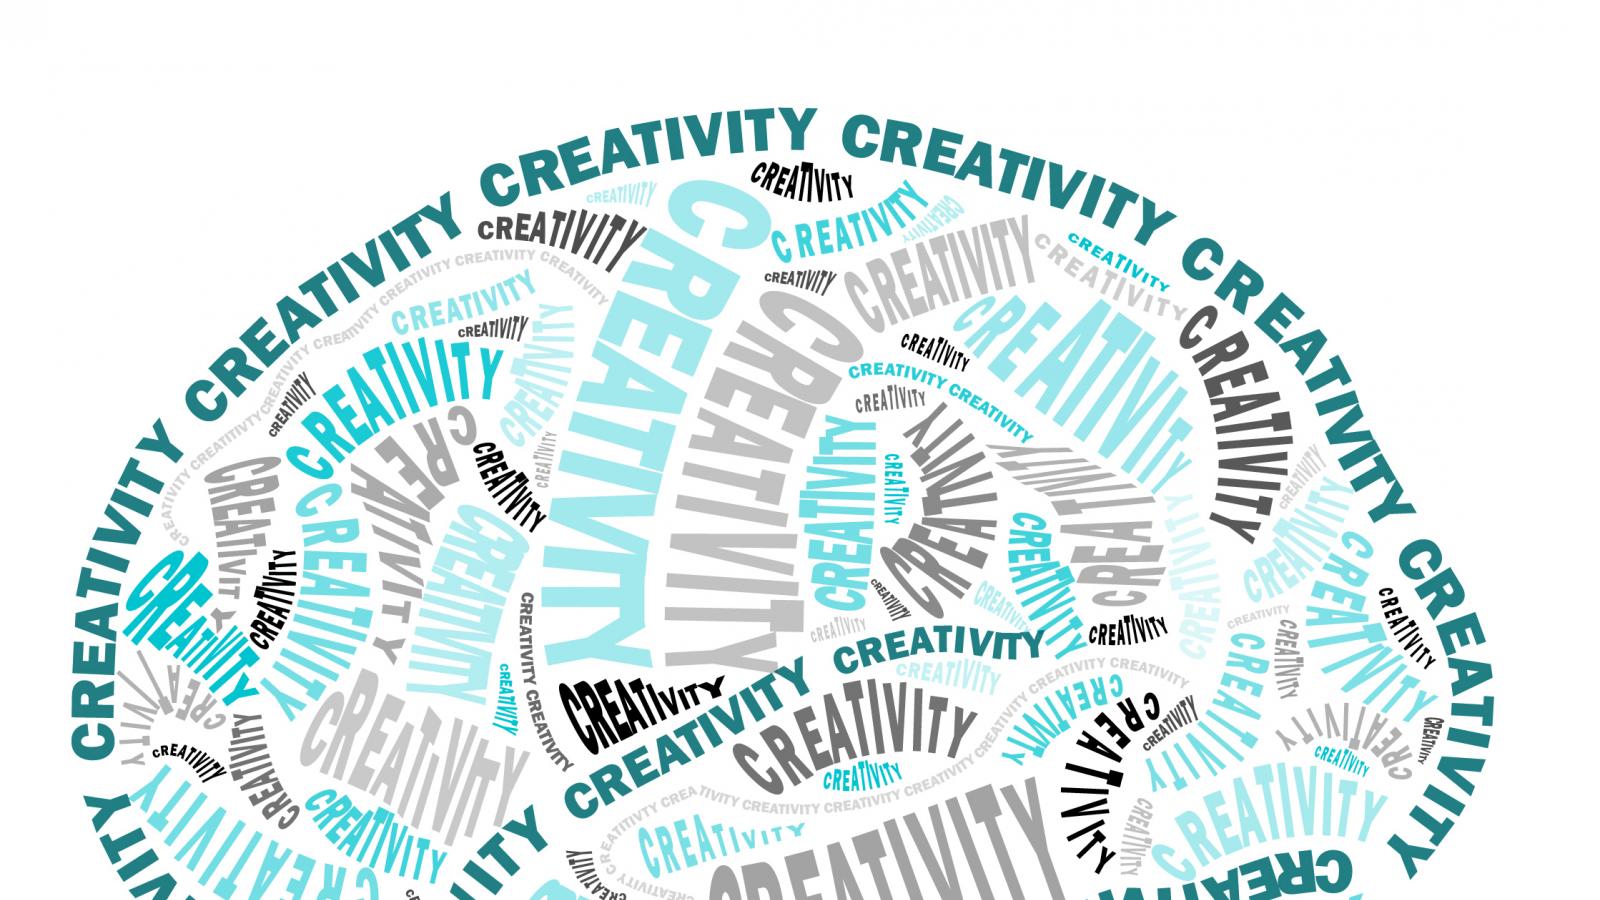 A graphic of a brain, made up of the word "creativity" in different sizes.